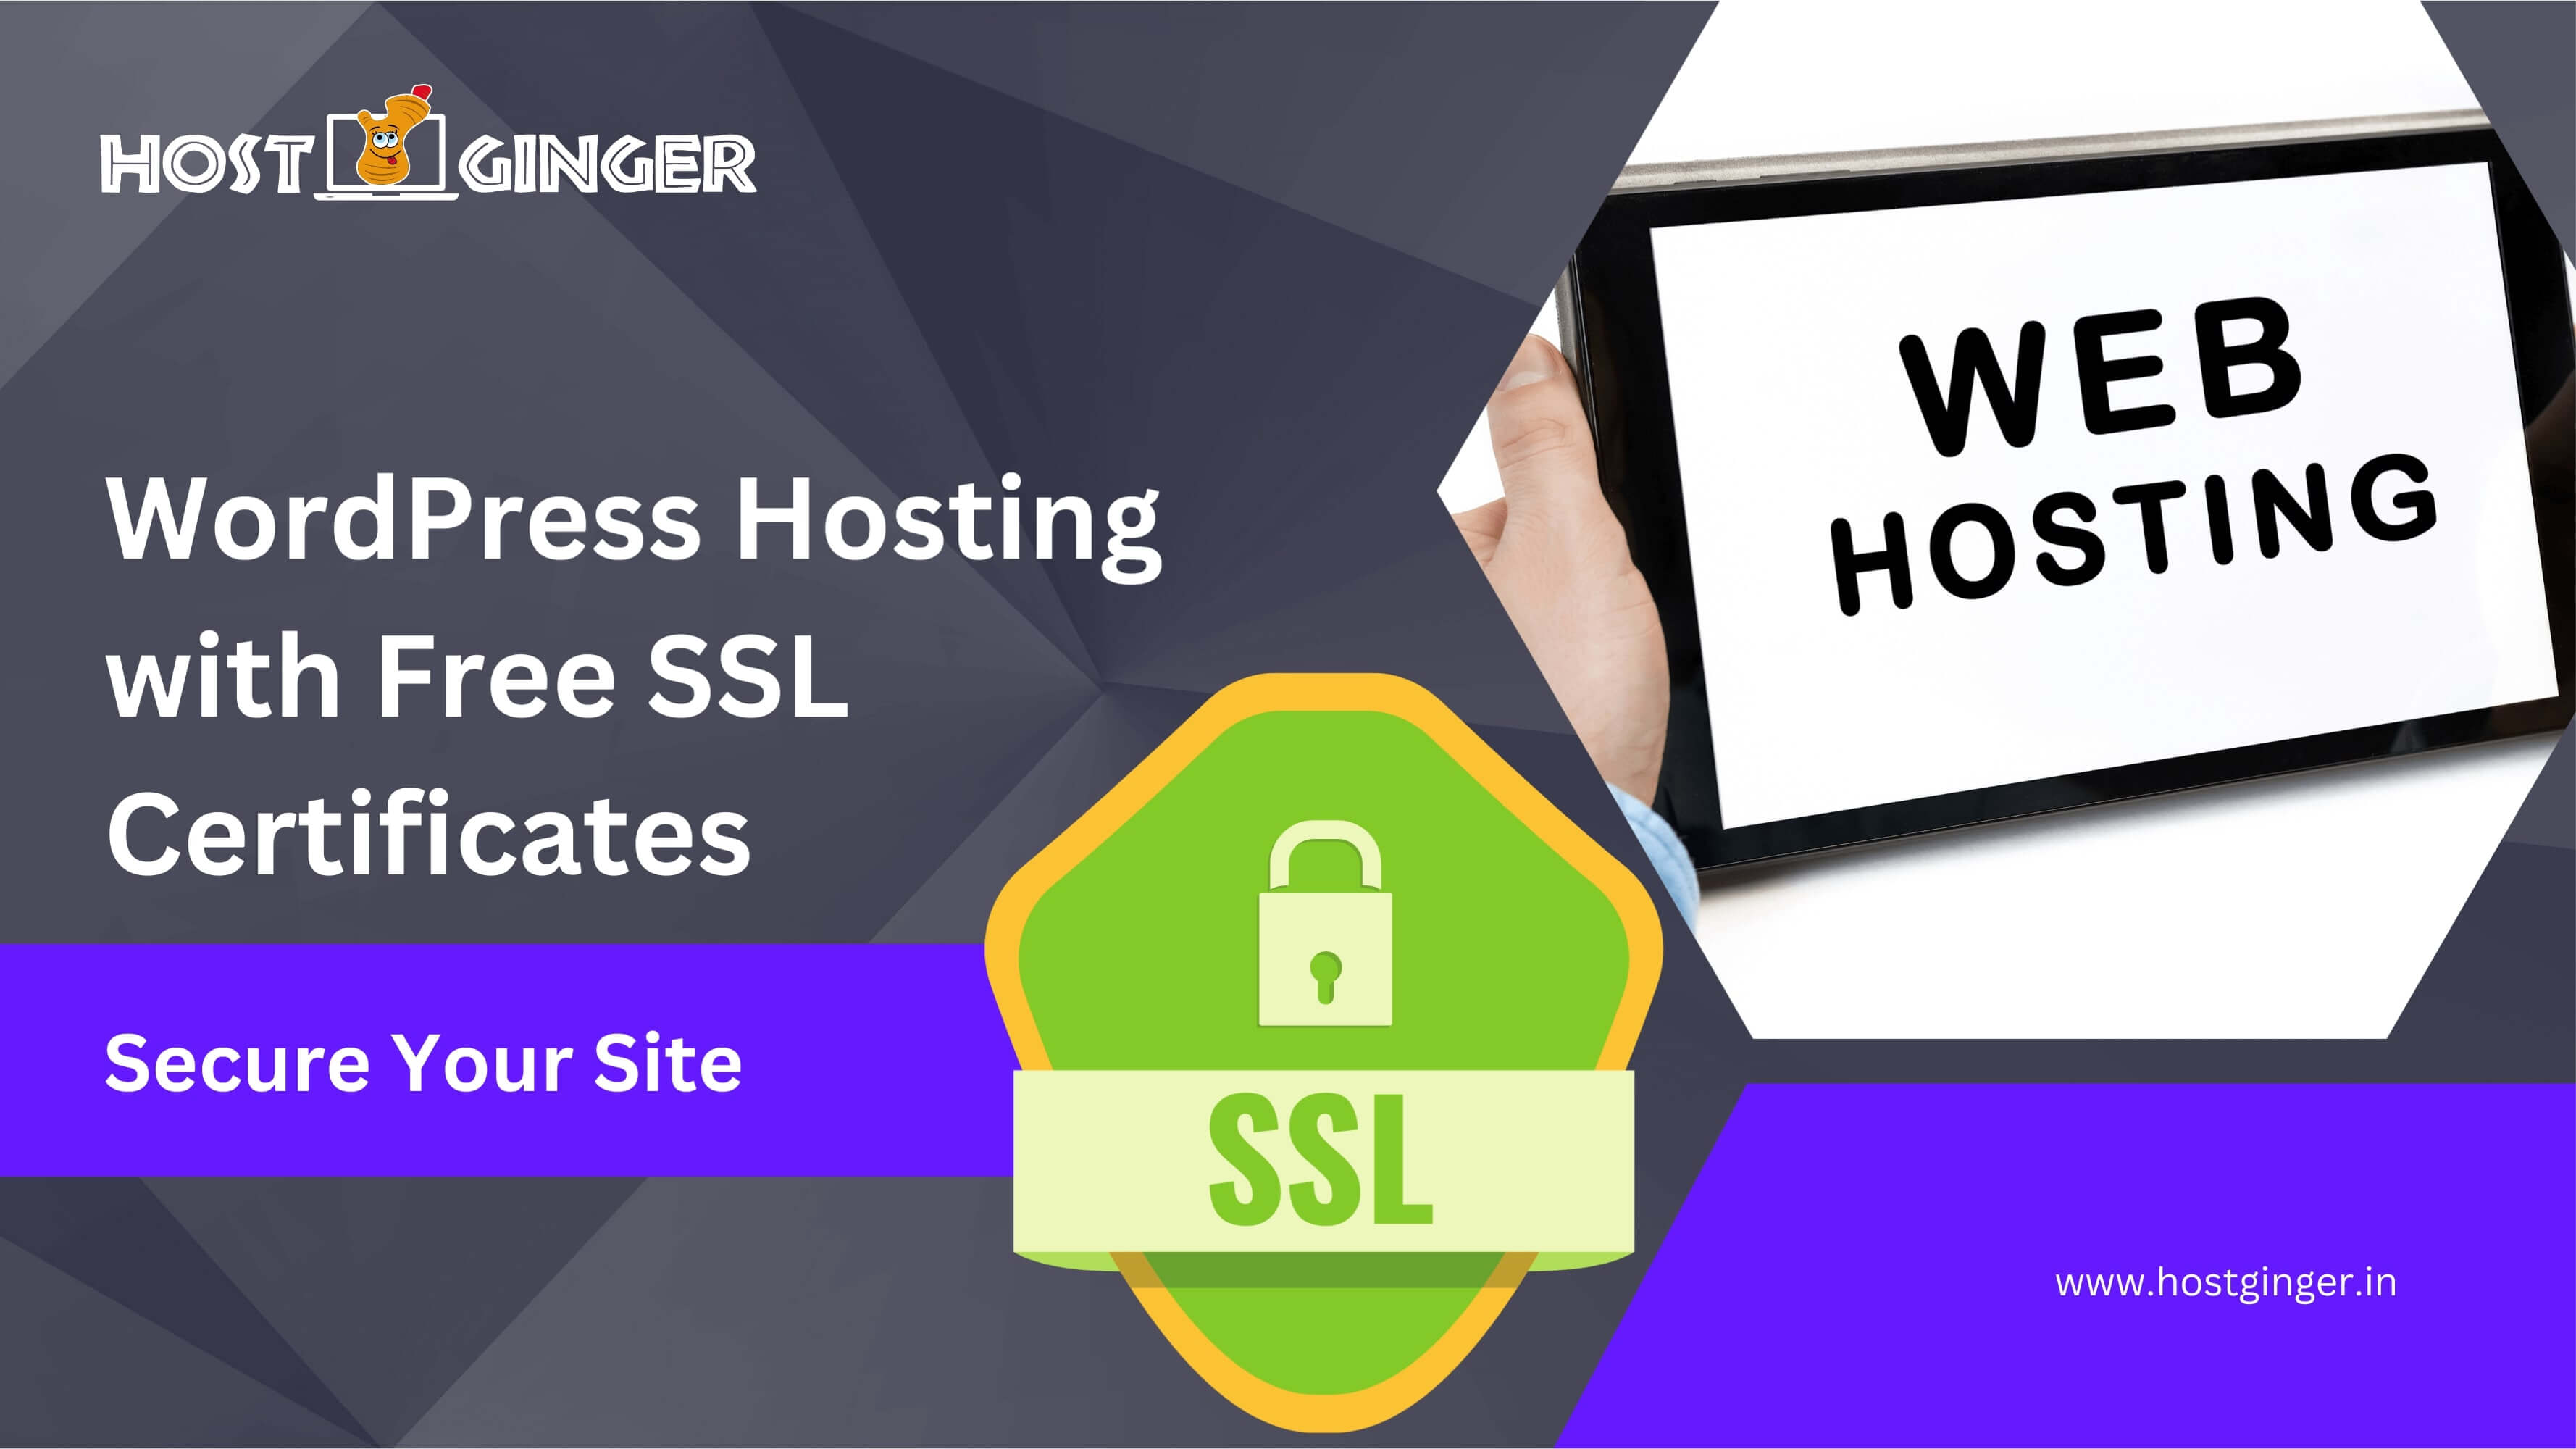 Secure Your Site: WordPress Hosting with Free SSL Certificates